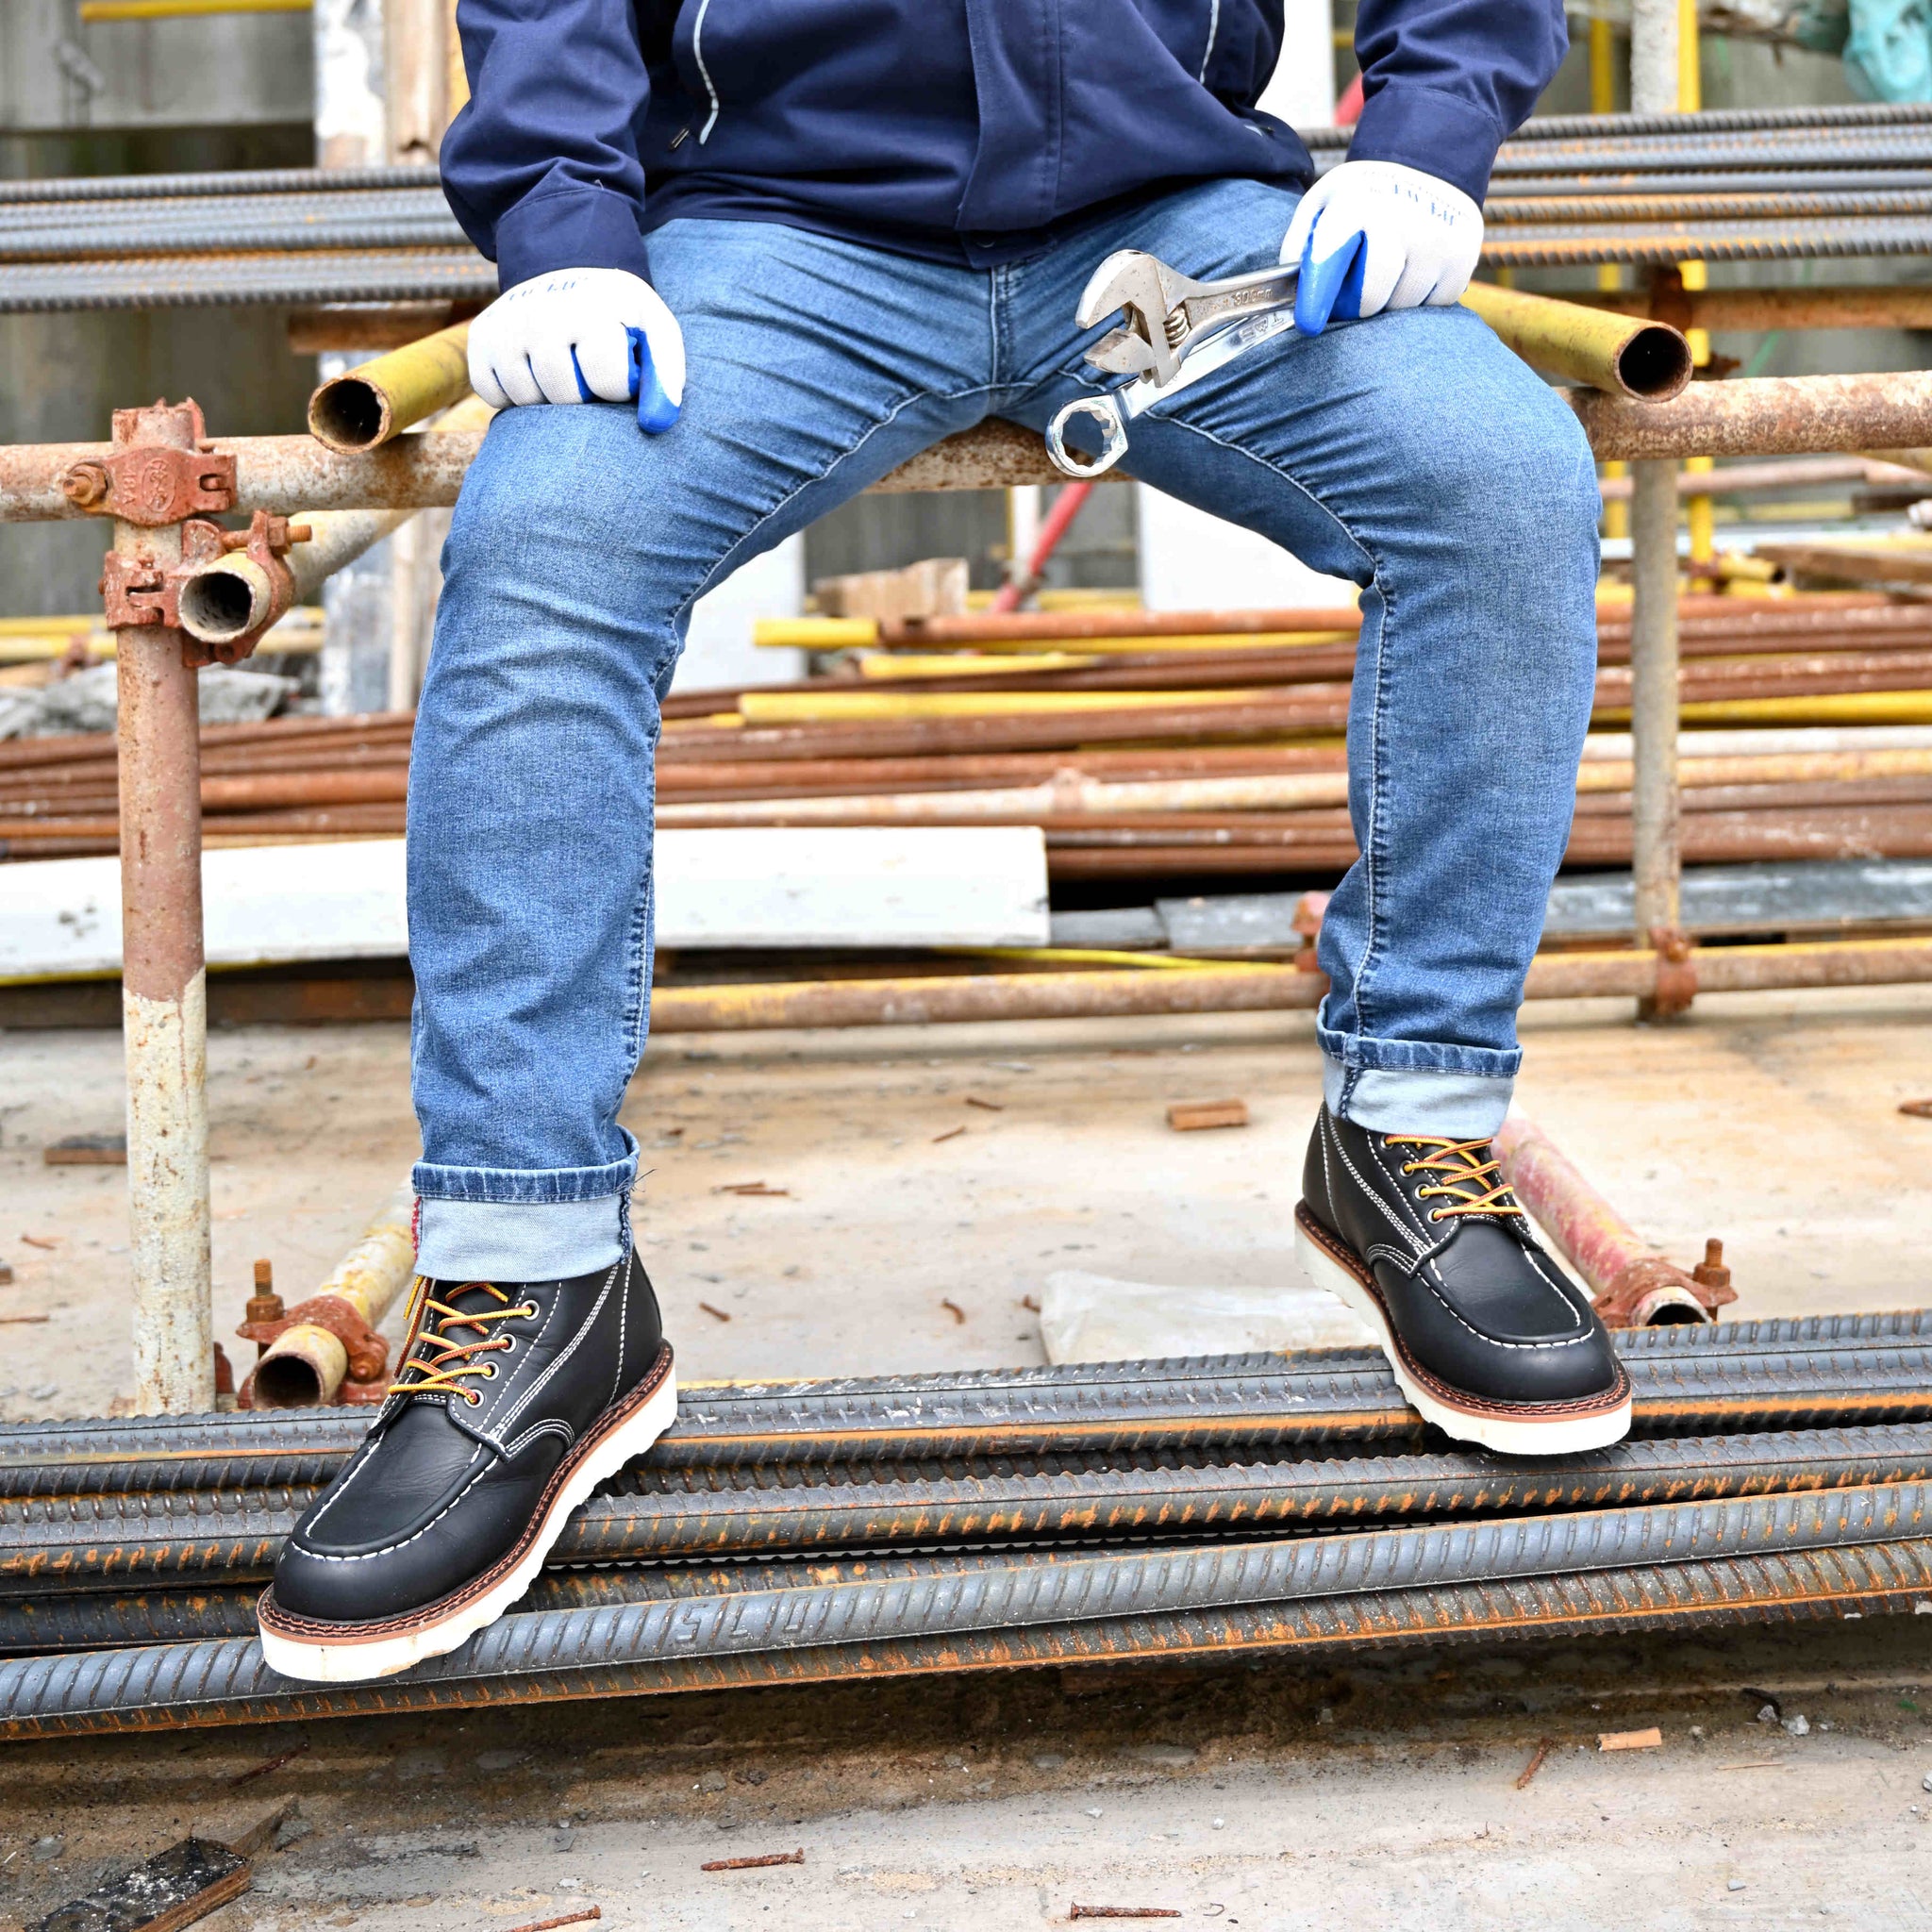 mens work boots with jeans